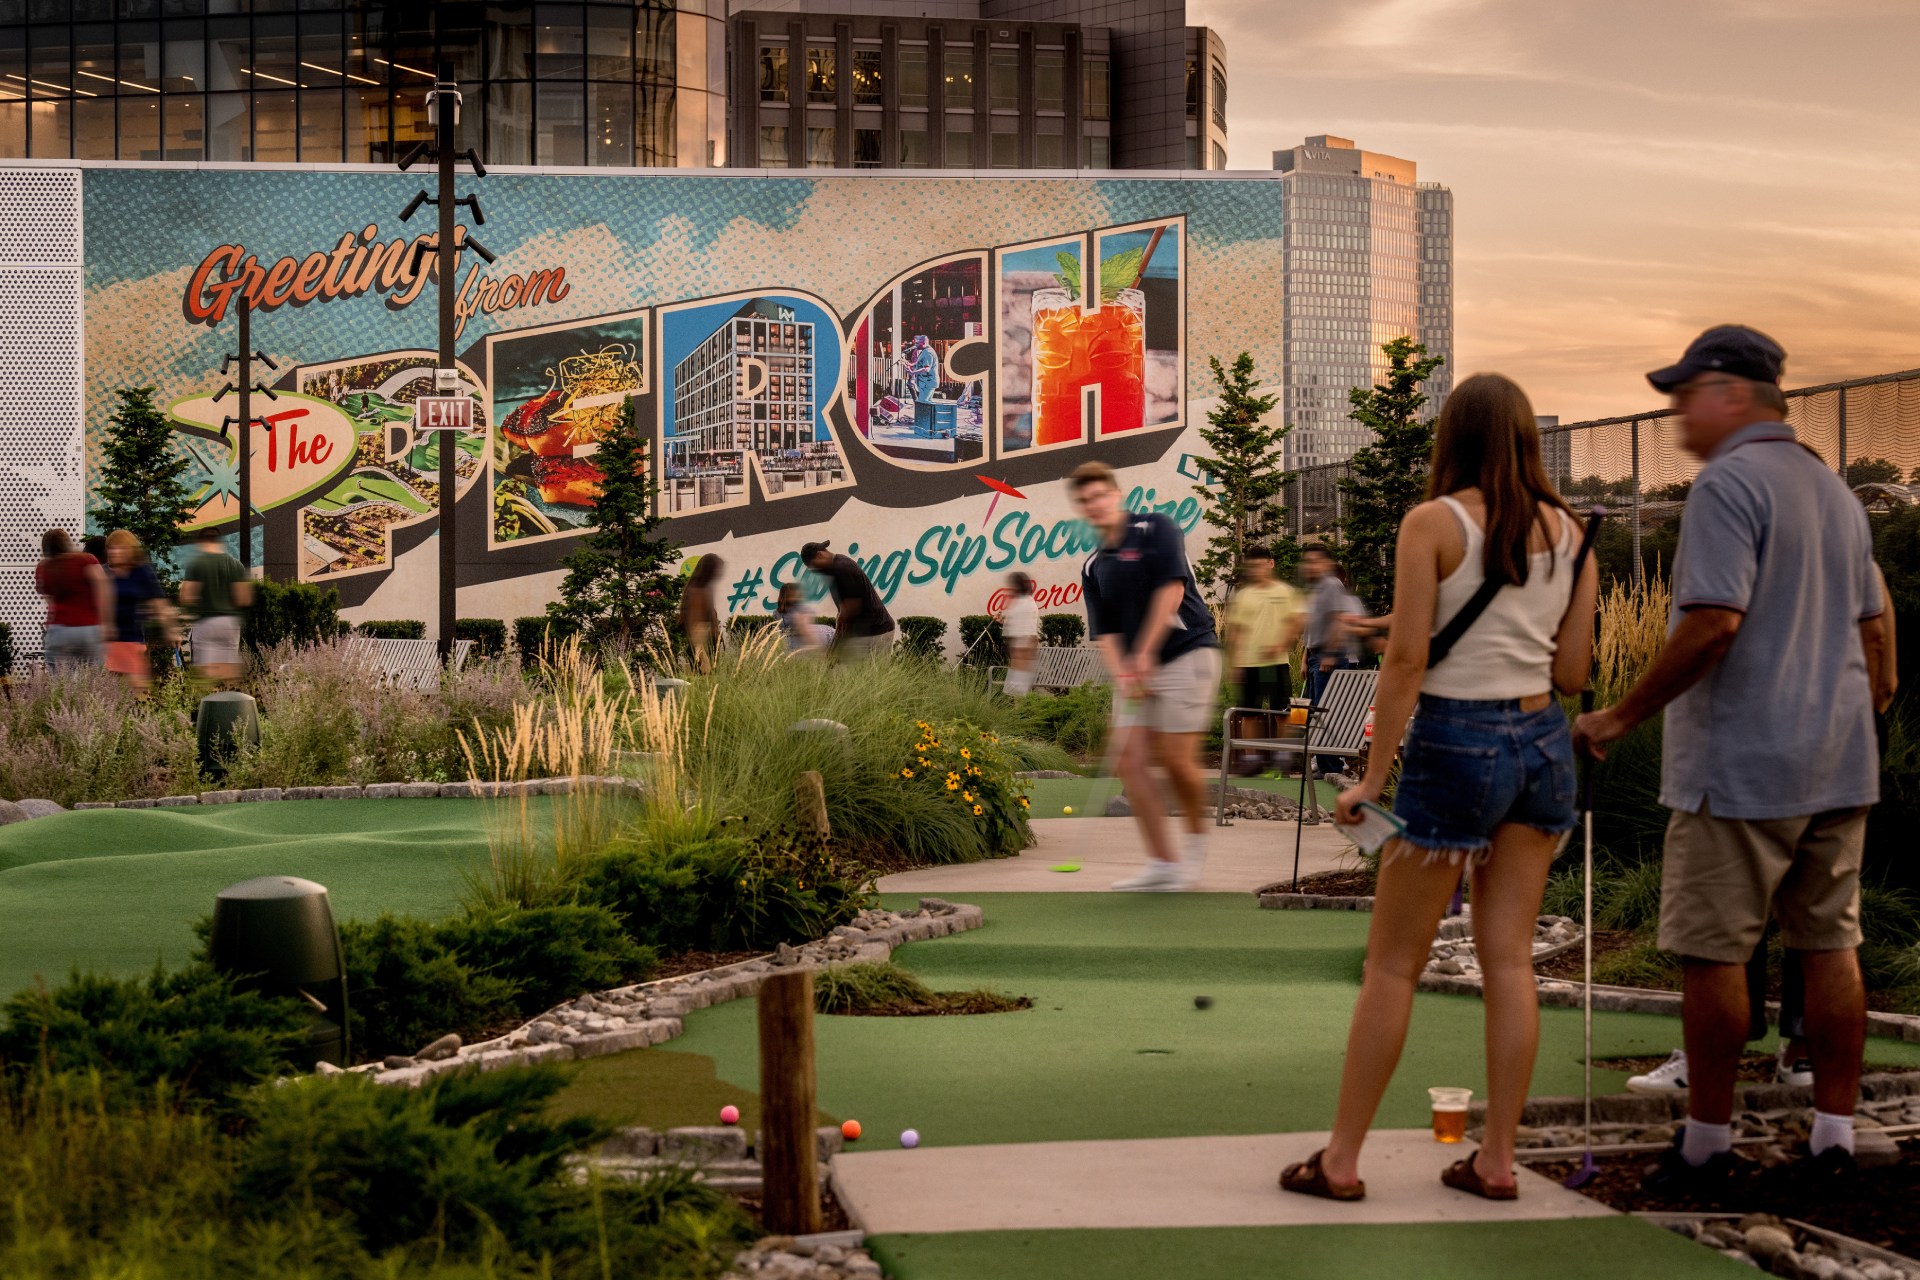 People near a mural welcoming them to the Perch where they are enjoying a game of mini golf